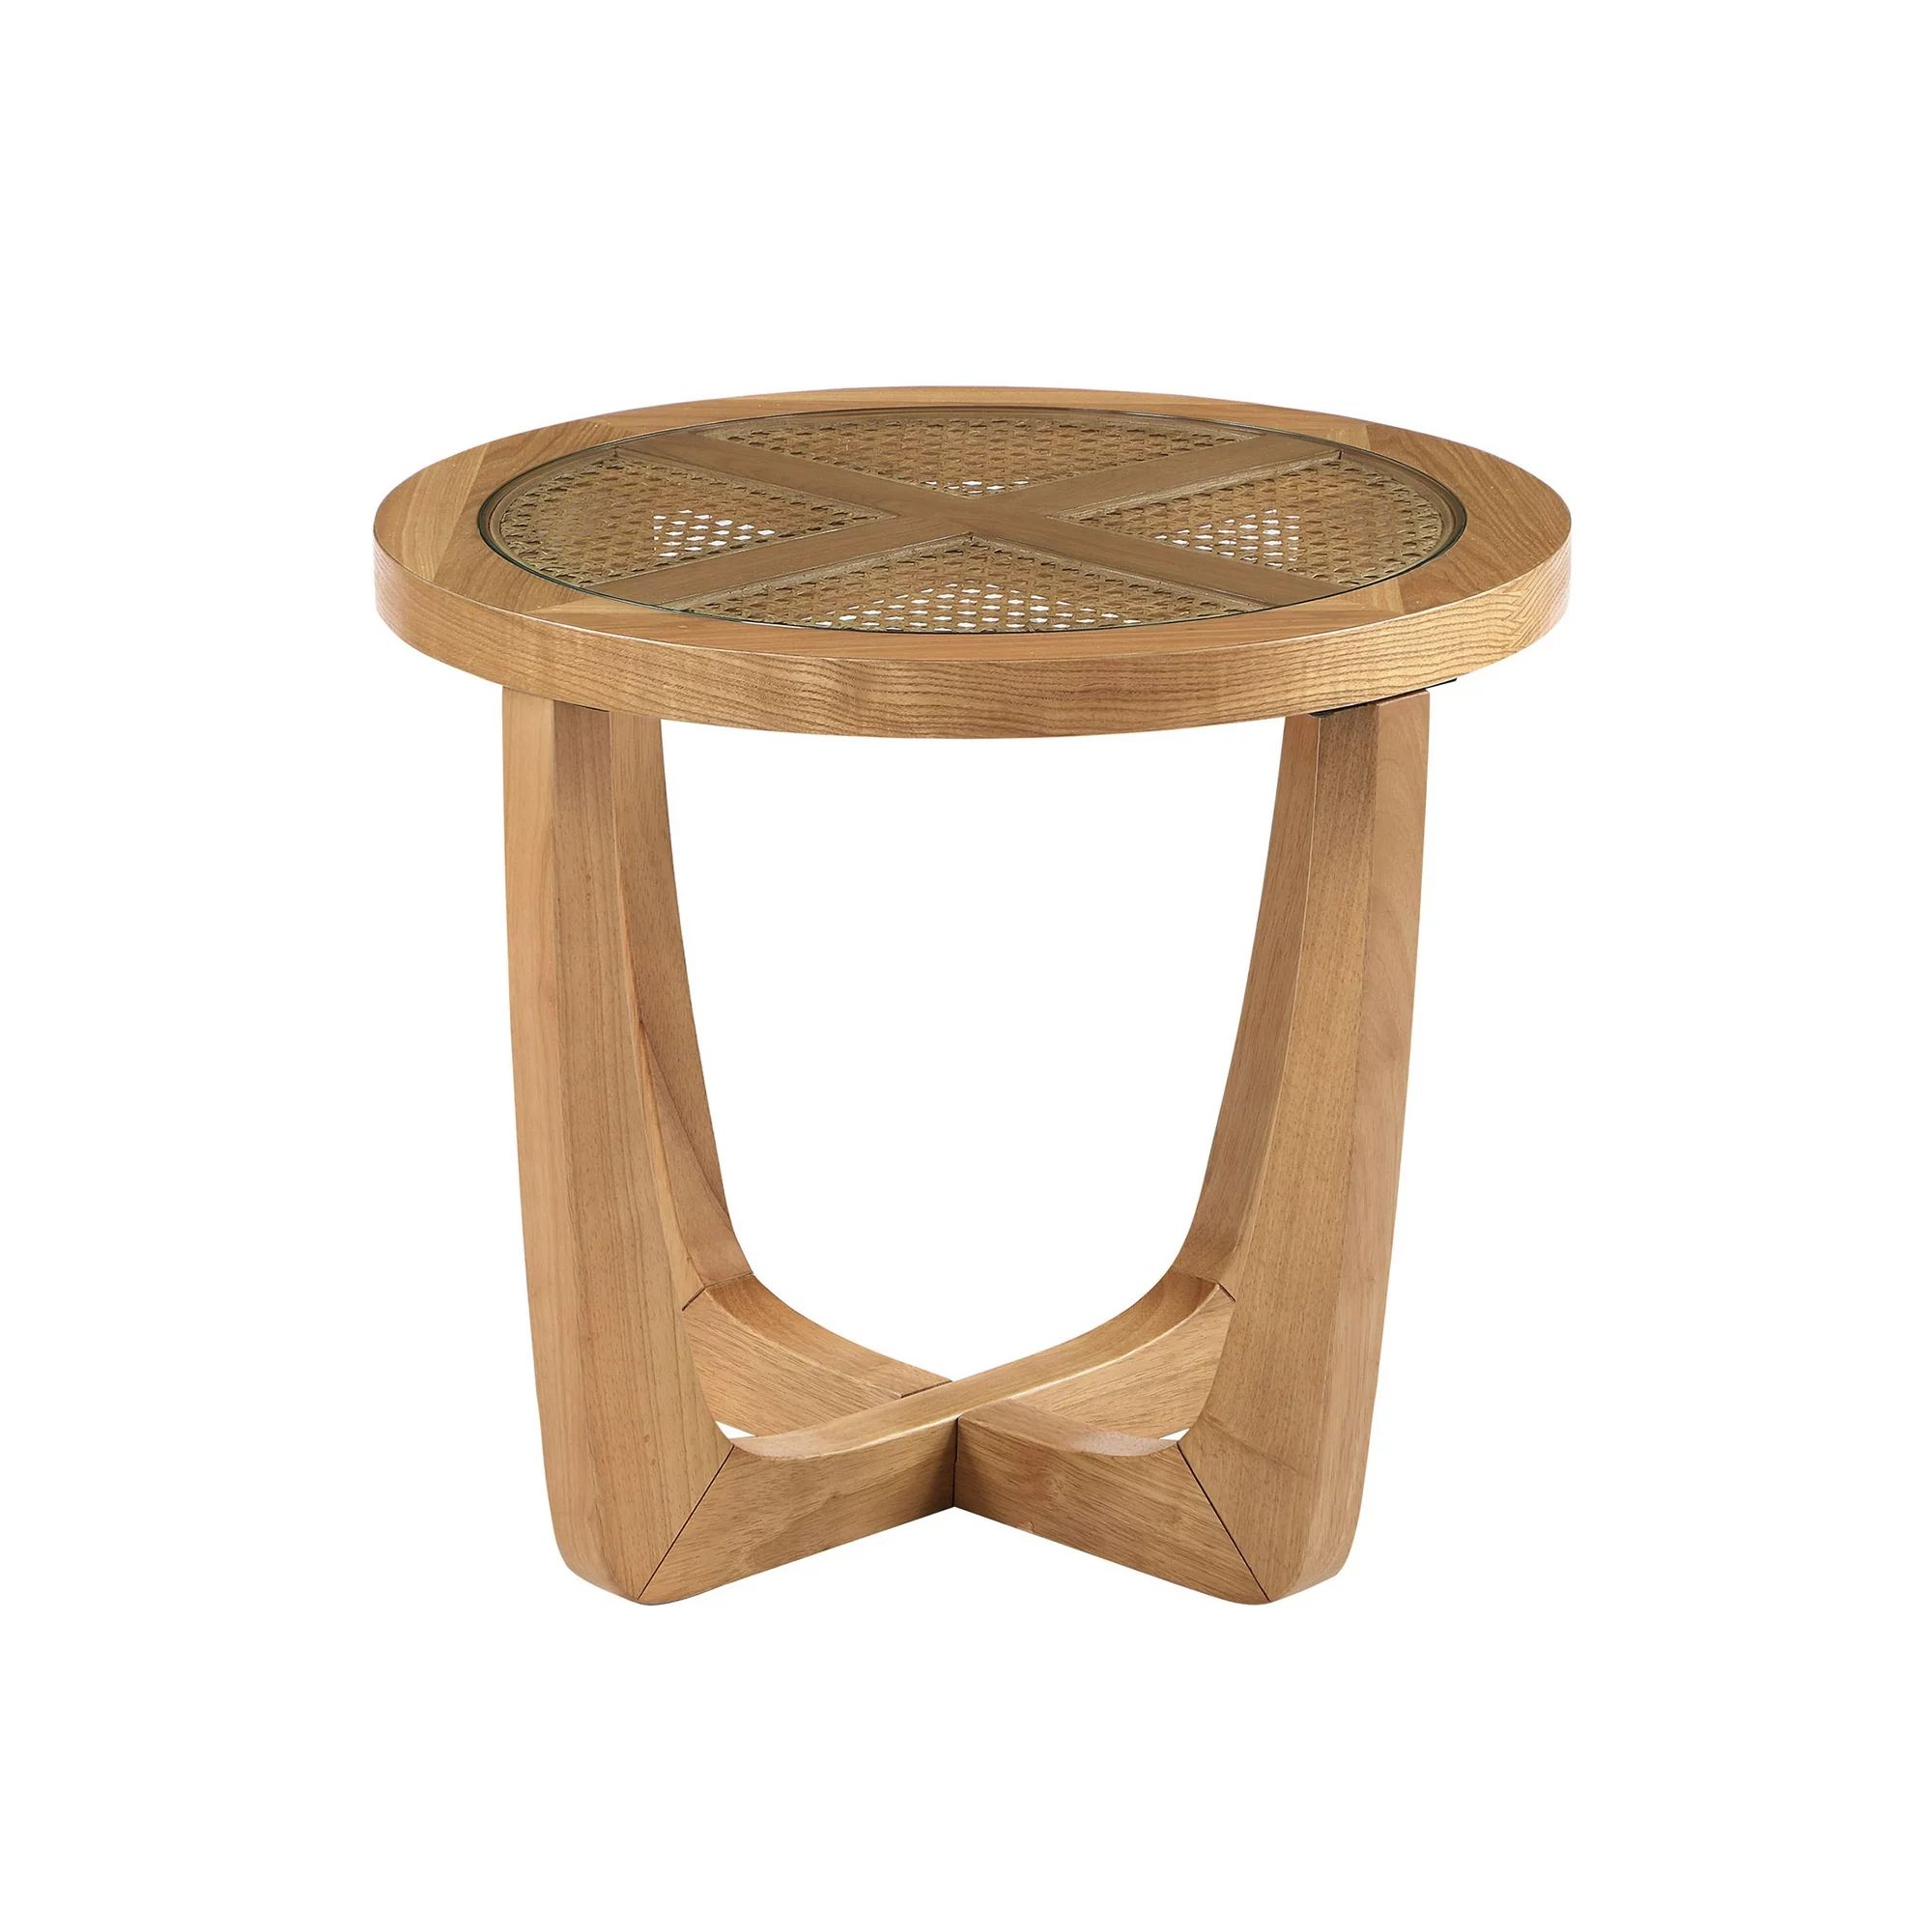 Beautiful Rattan & Glass Side Table with Solid Wood Frame by Drew Barrymore, Warm Honey Finish - ... | Walmart (US)